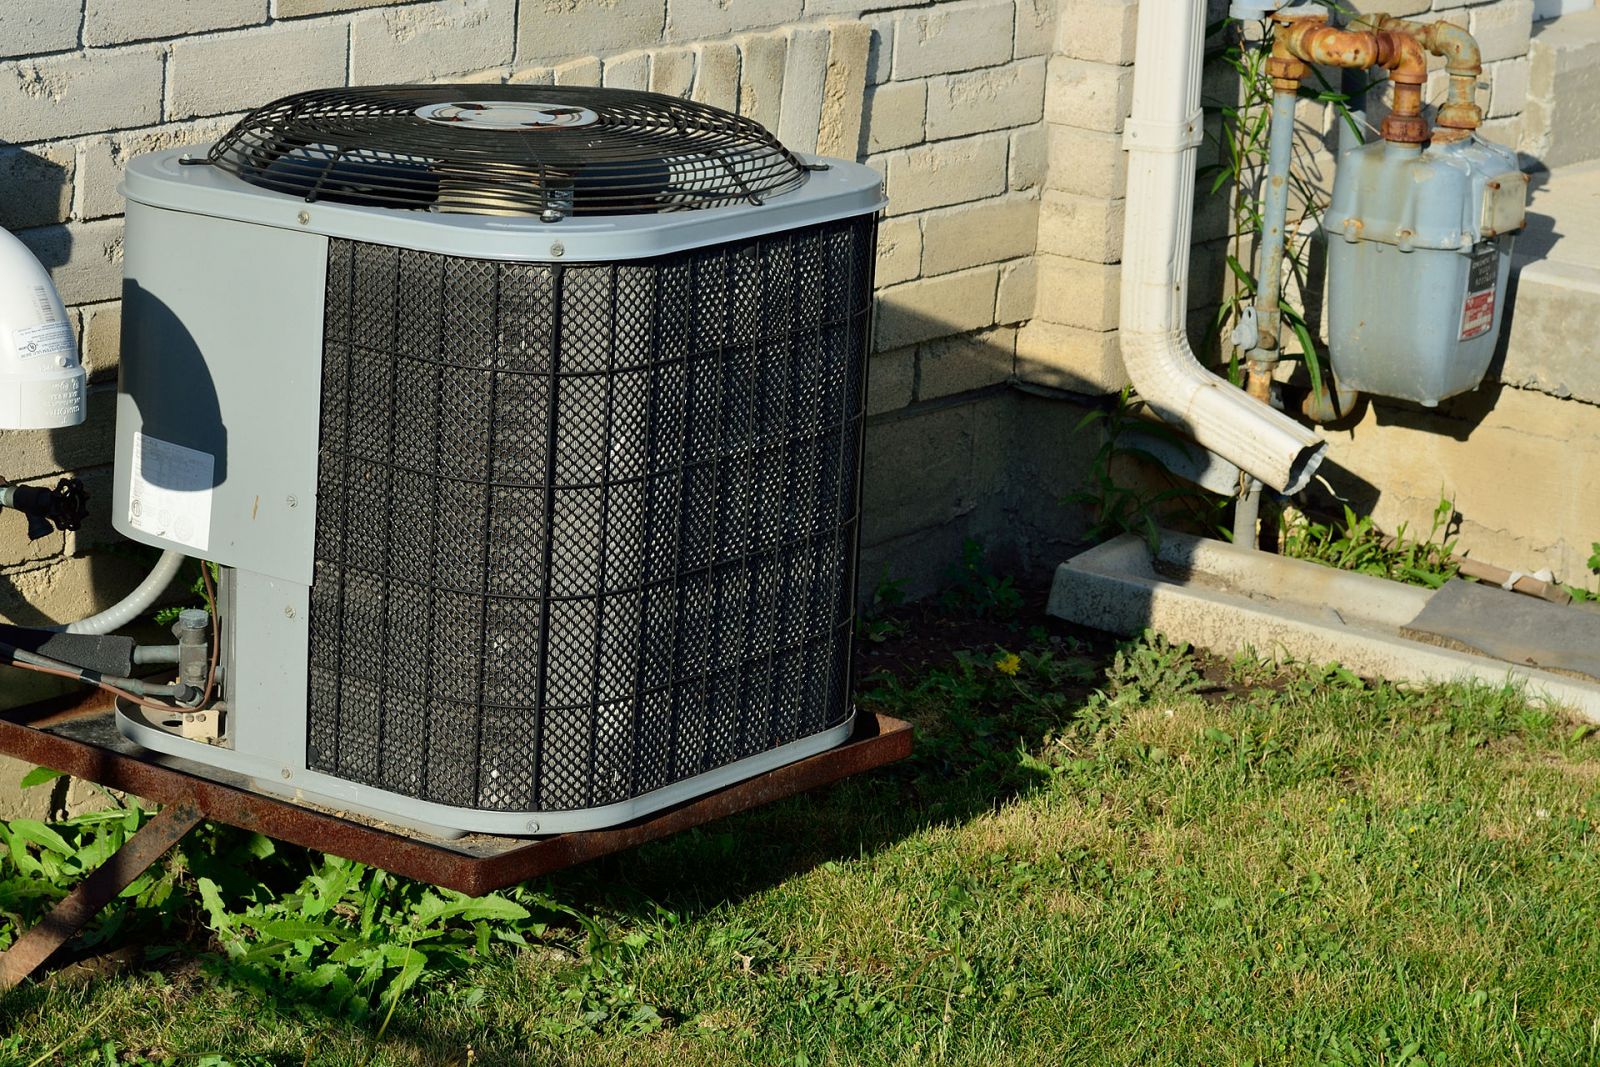 Take a Look on Some Innovations in Air Conditioning